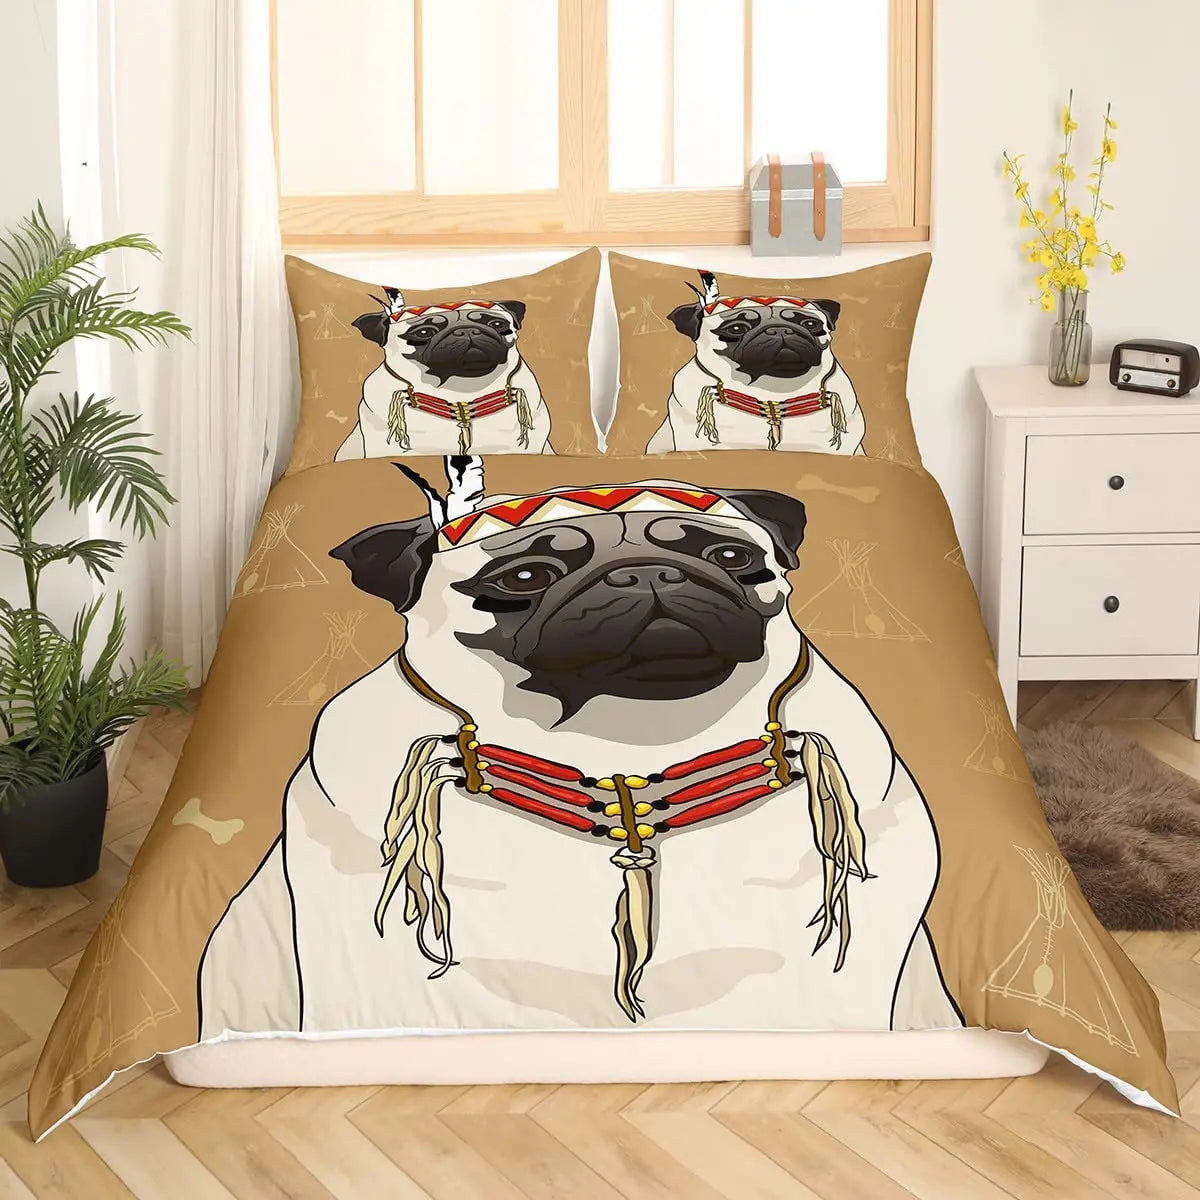 Cartoon Pug Dog Duvet Cover Set Cute Dog Theme Bedding Set King Queen Size Soft Comforter Cover for Kids Polyester Bedclothes